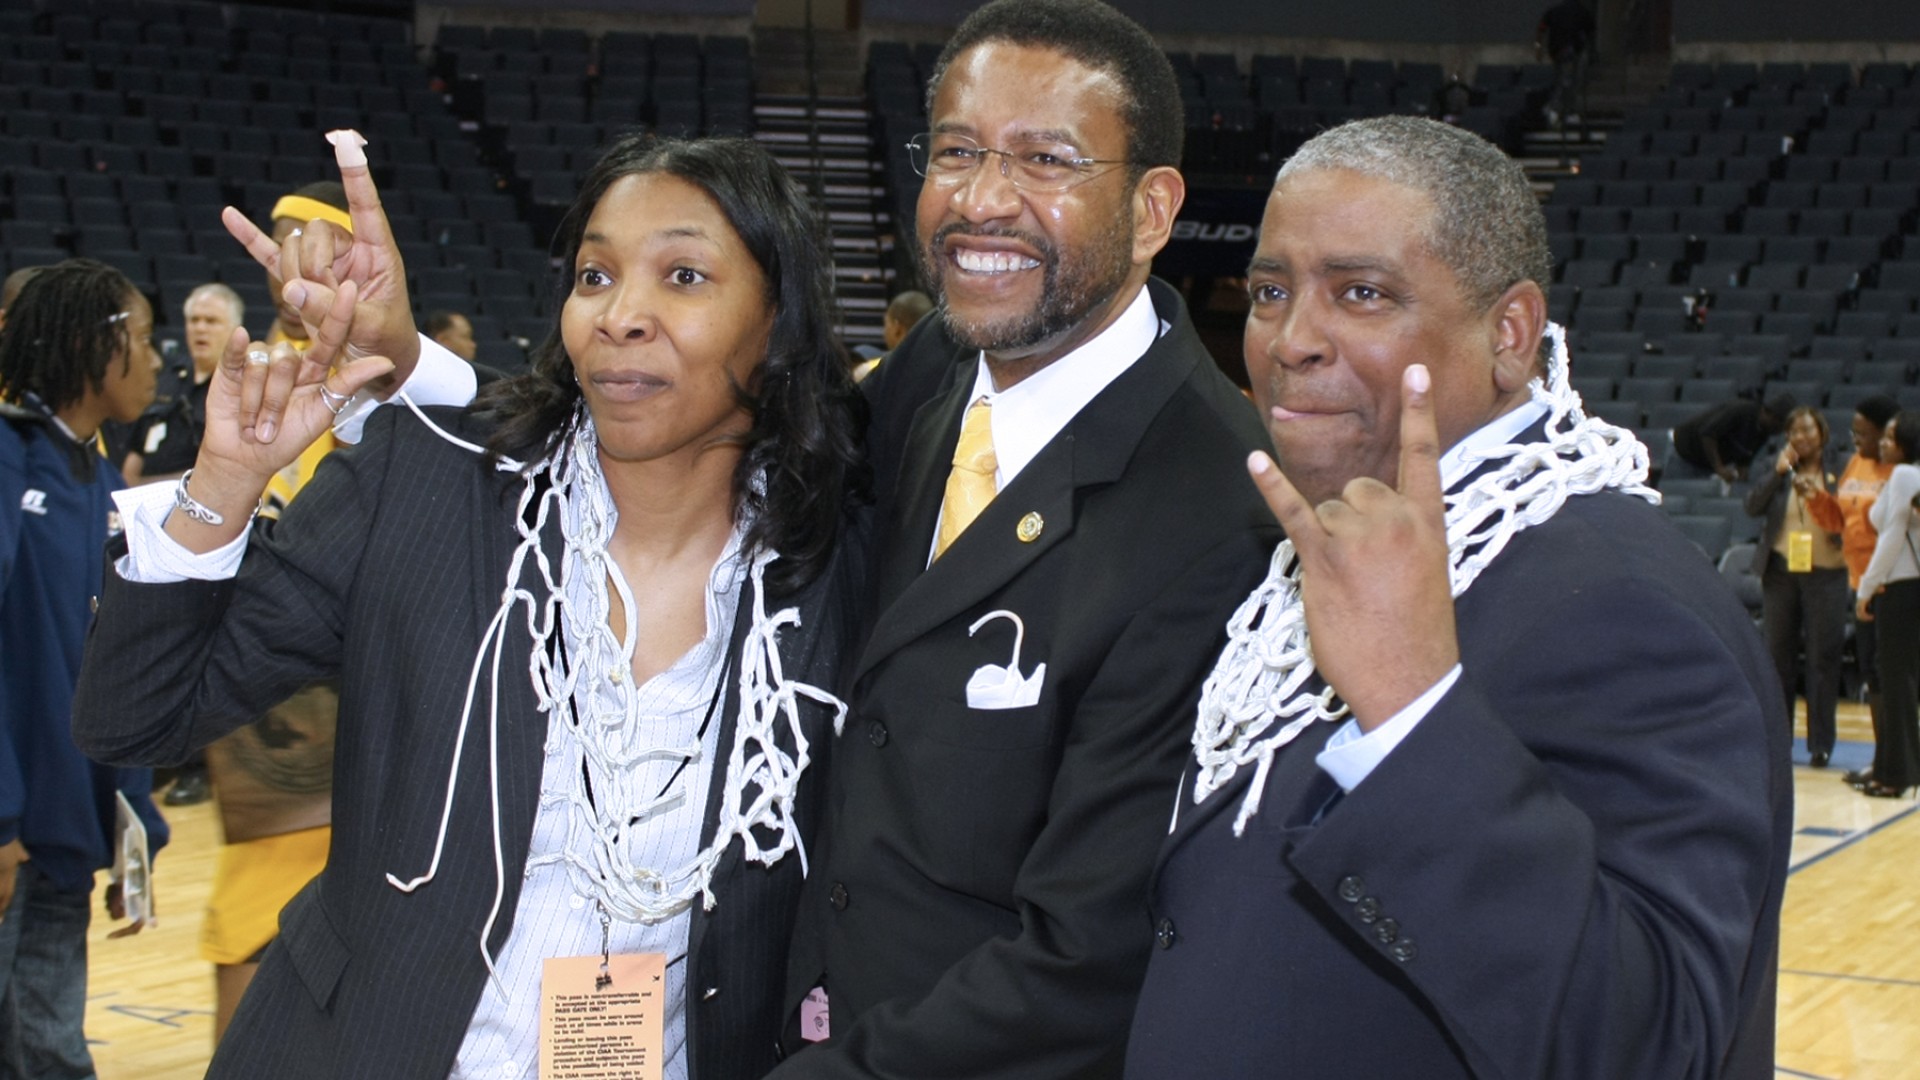 Steve Joyner with a basketball net around his head celebrating with President Ronald L. Carter after the 2008 CIAA Championship